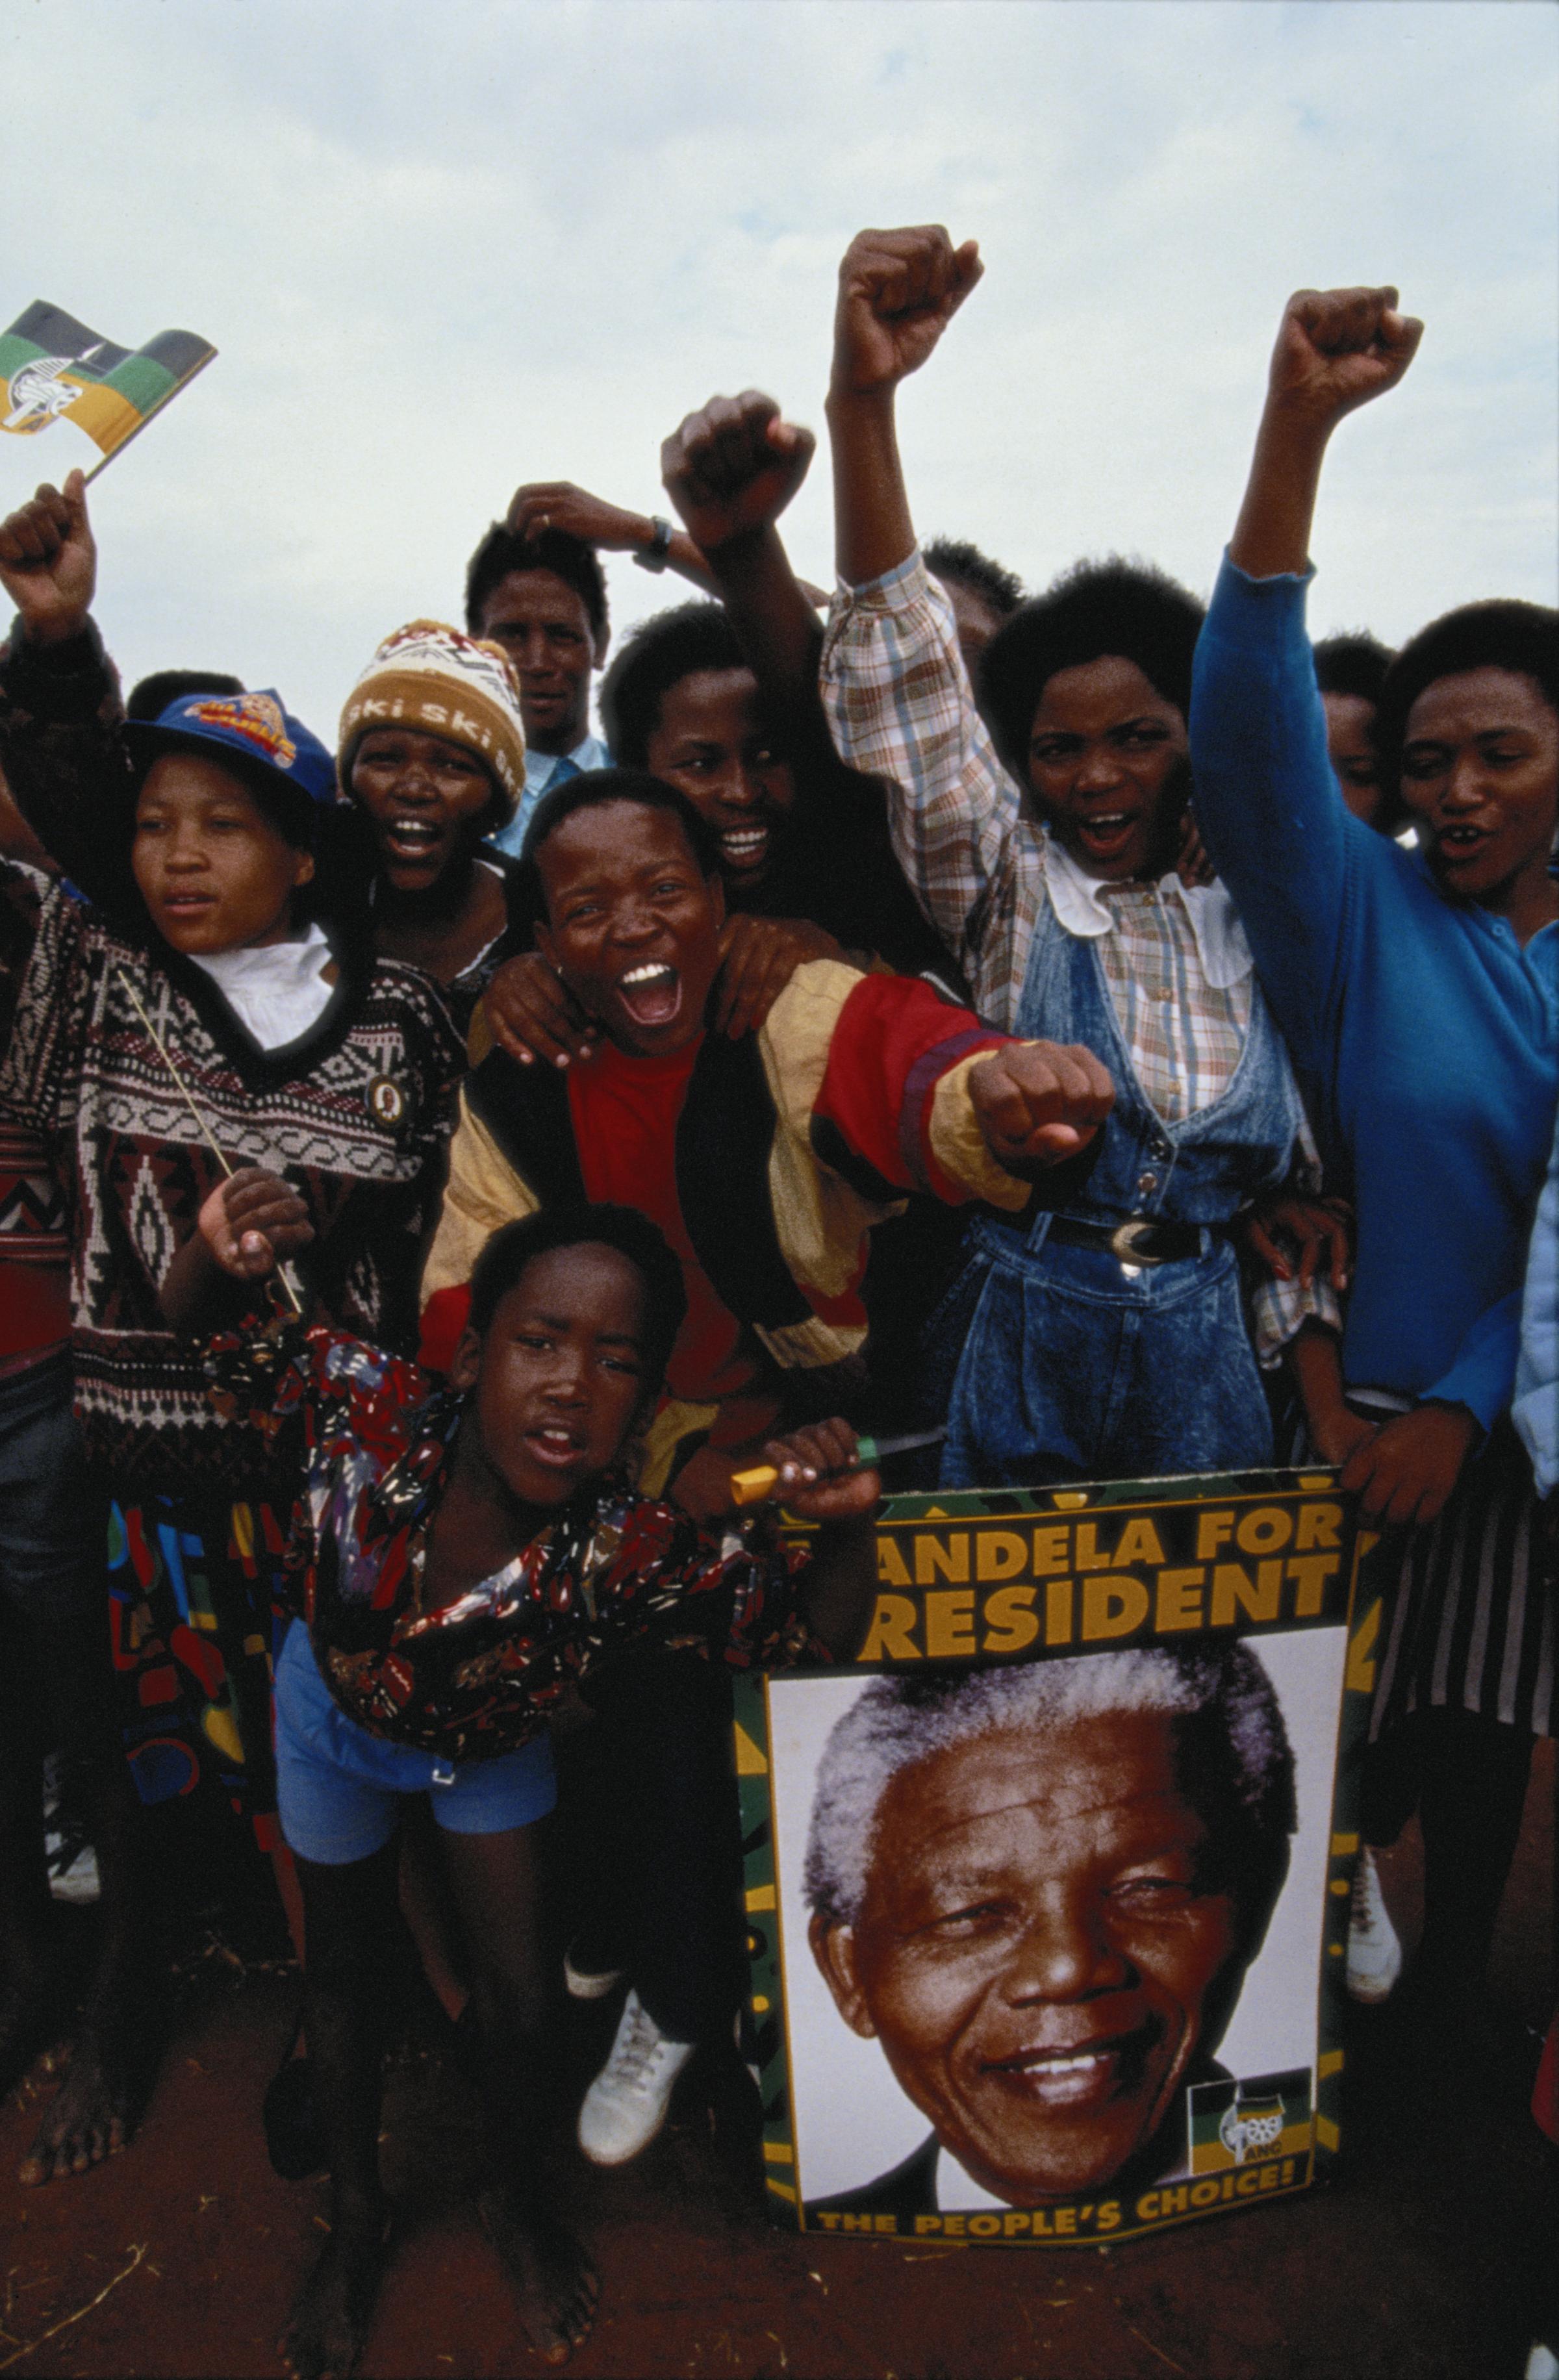 Supporters of the African National Congress (ANC) give clenched fist salutes at a rally addressed by ANC leader Nelson Mandela in the run up to South Africas first General Election to be held with universal adult suffrage, April 1994. On the right is a